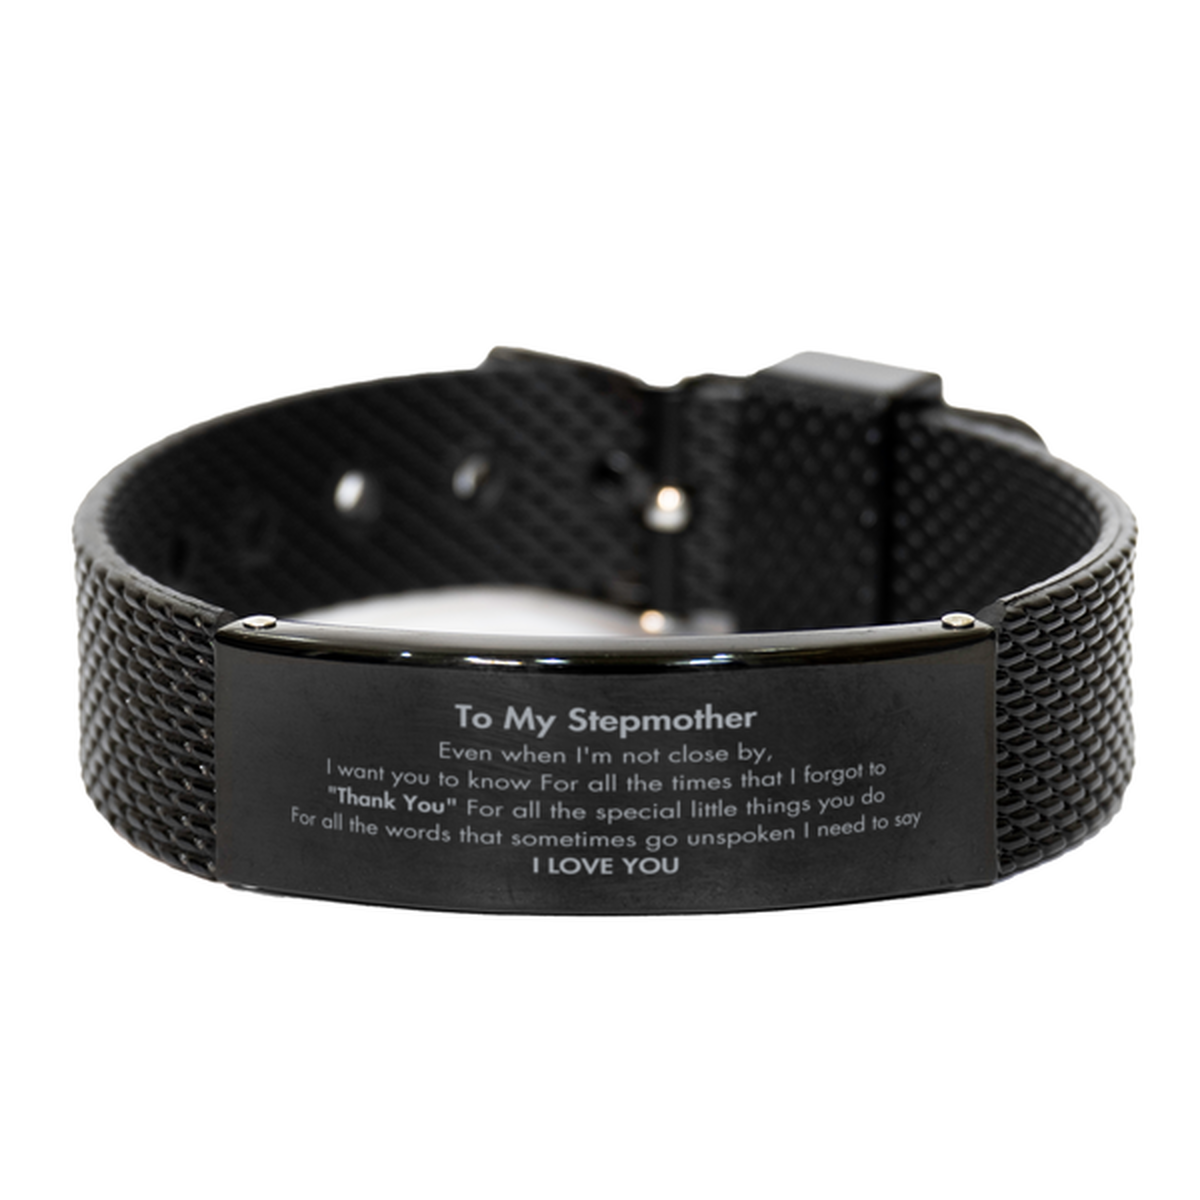 Thank You Gifts for Stepmother, Keepsake Black Shark Mesh Bracelet Gifts for Stepmother Birthday Mother's day Father's Day Stepmother For all the words That sometimes go unspoken I need to say I LOVE YOU